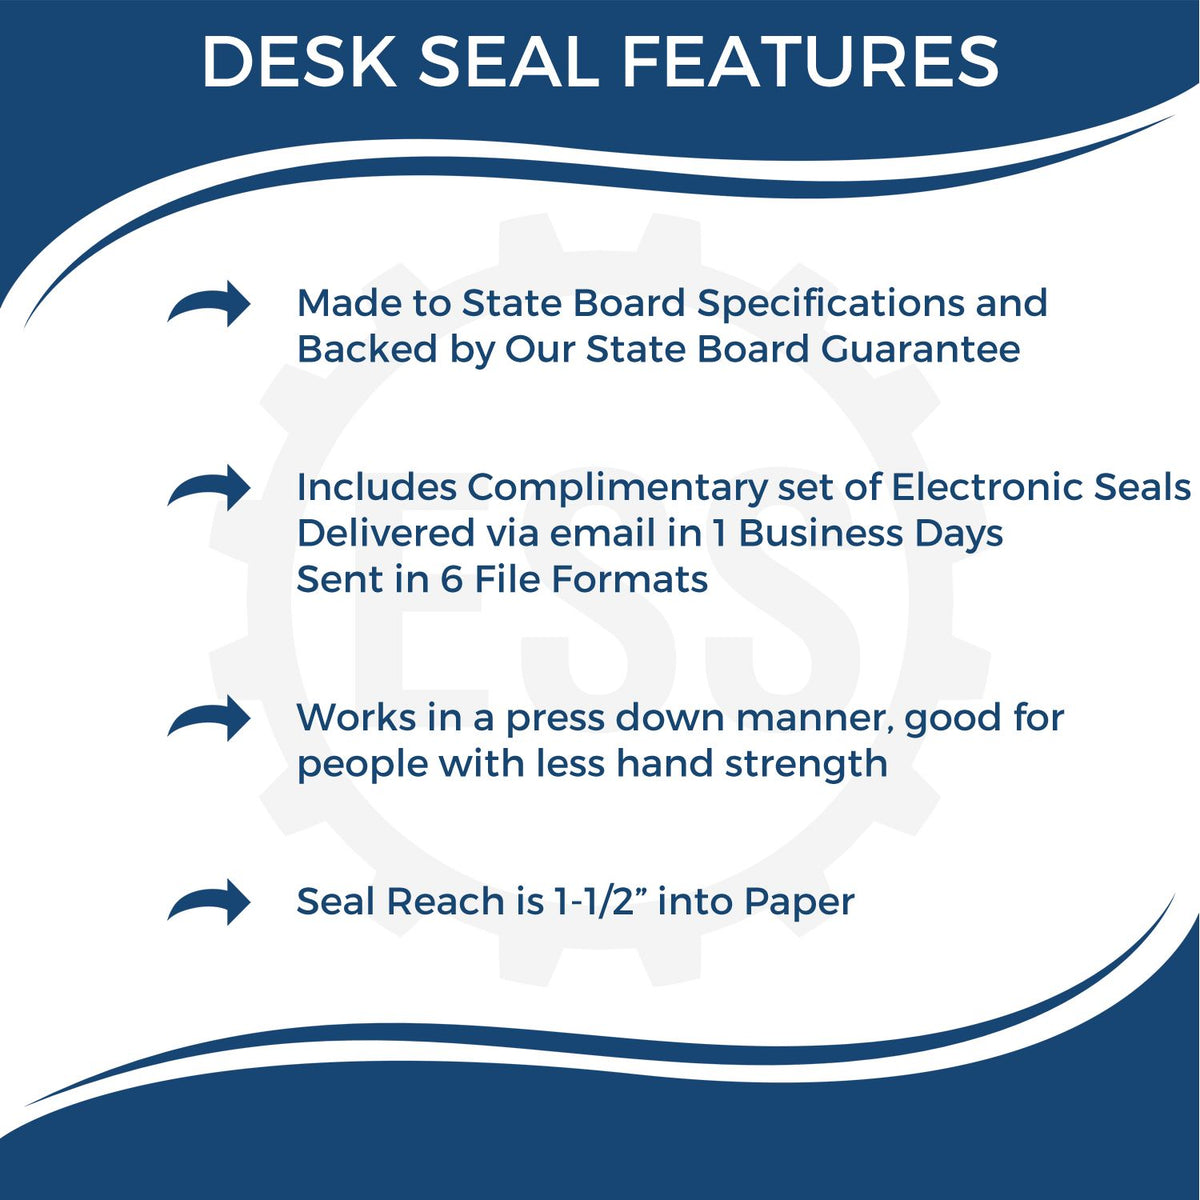 A picture of an infographic highlighting the selling points for the New York Desk Architect Embossing Seal